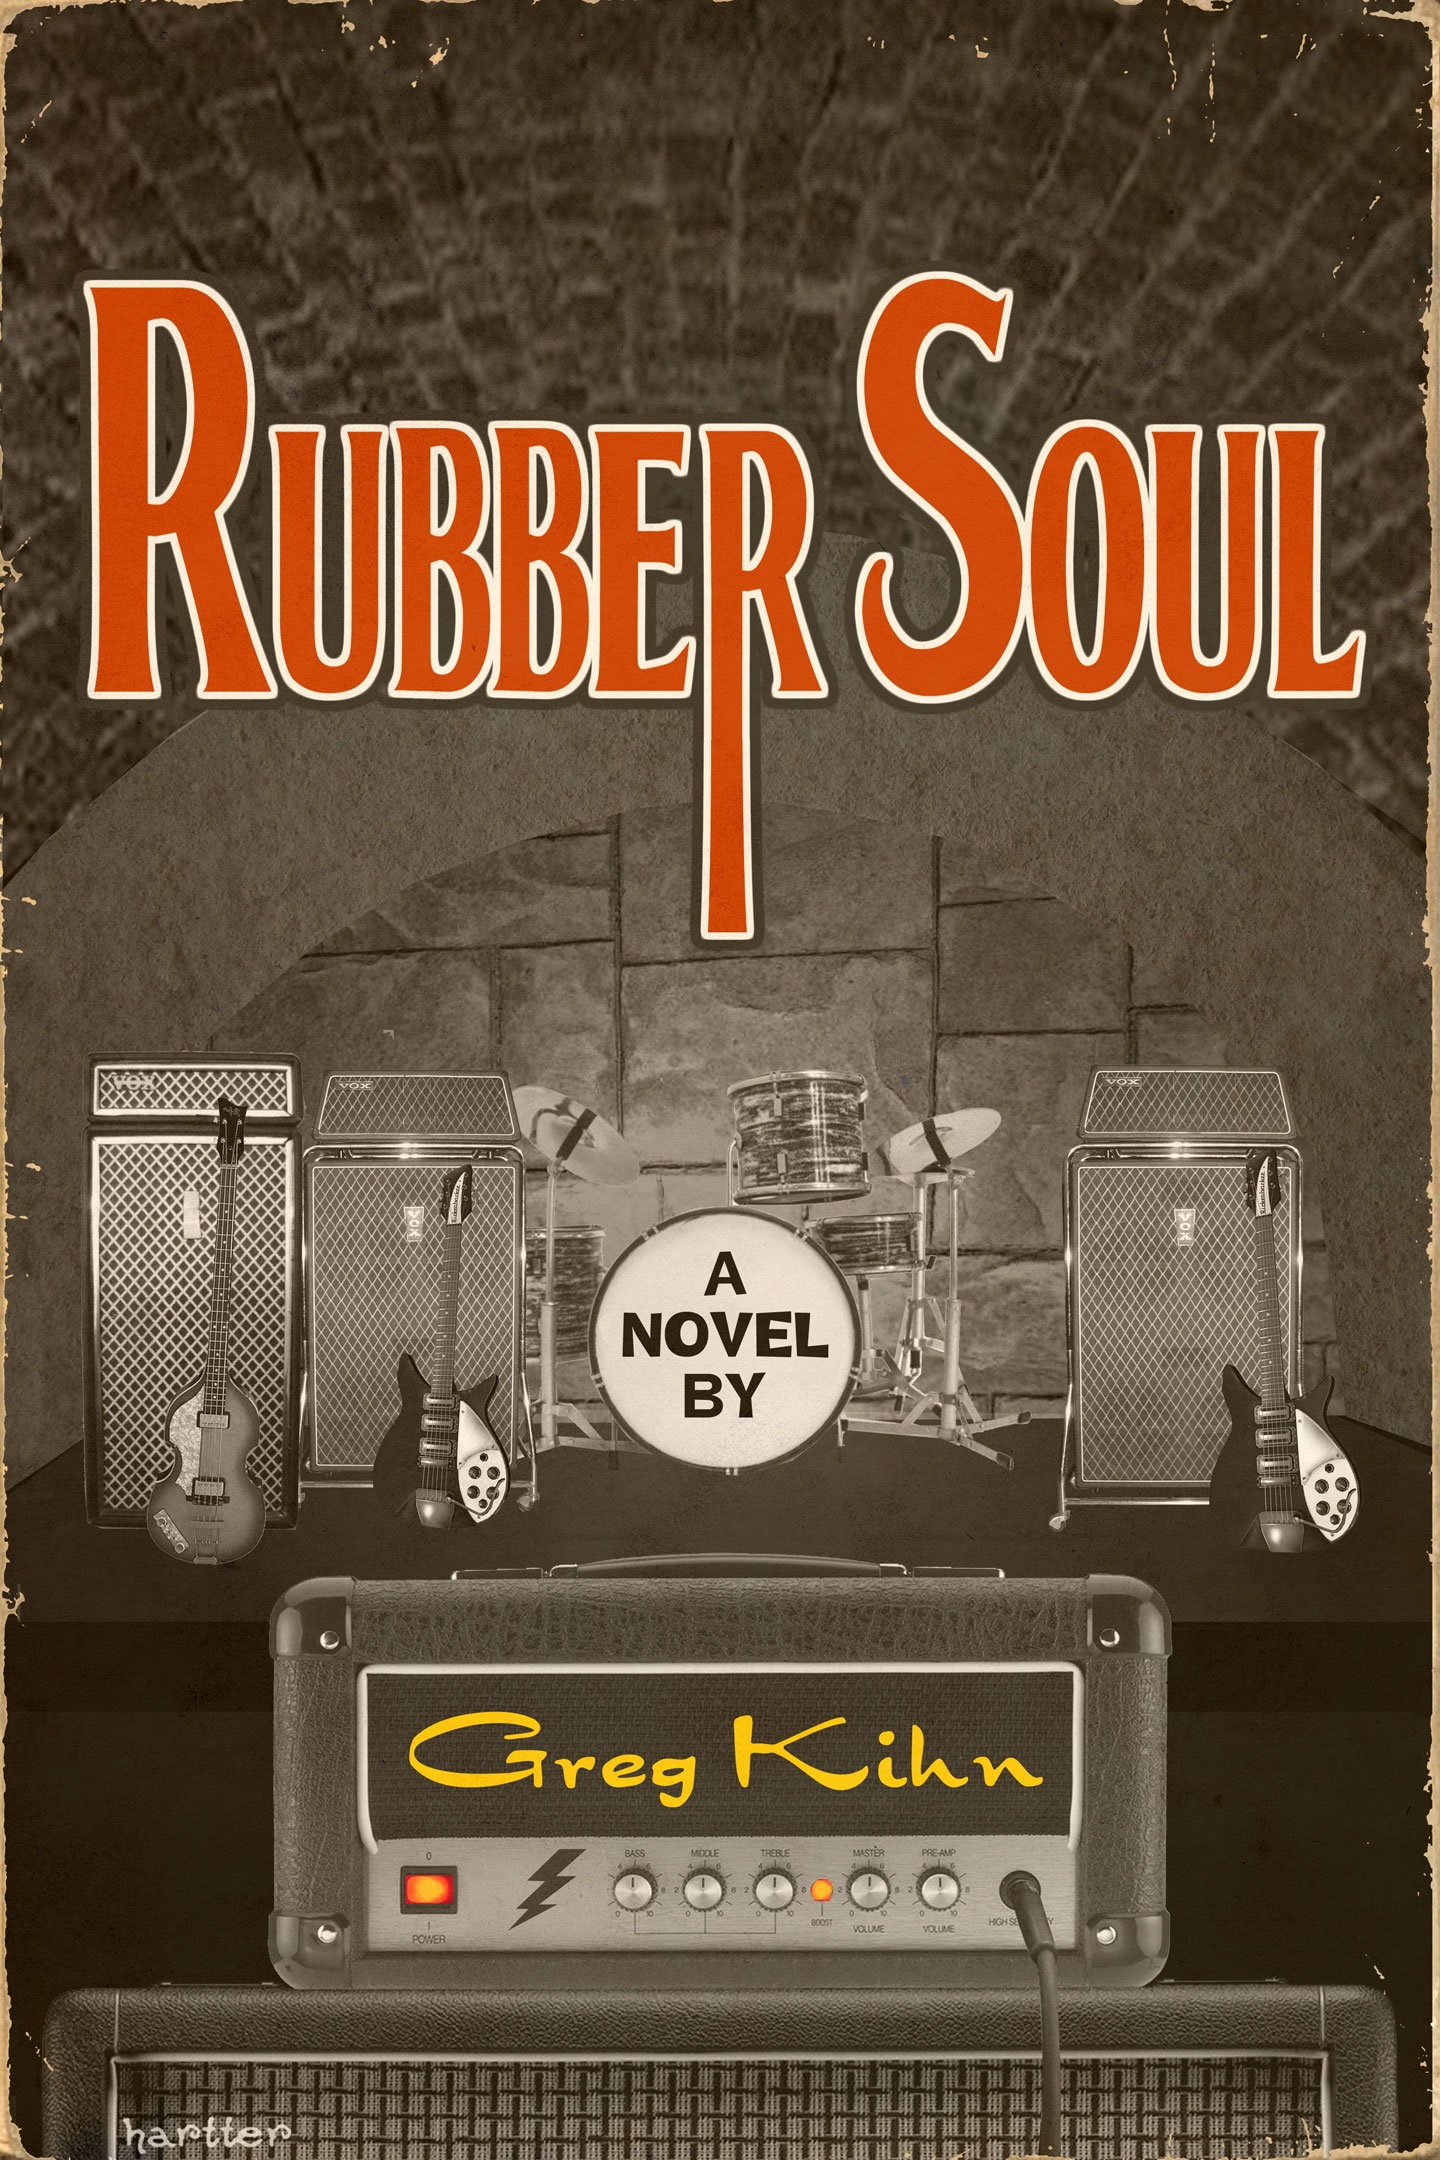 Rubber Soul, the fifth Novel from Greg Kihn, featuring The Beatles Themselves, released in 2013. Buy both PAINTED BLACK and RUBBER SOUL together as a special book bundle at GregKihn.com.